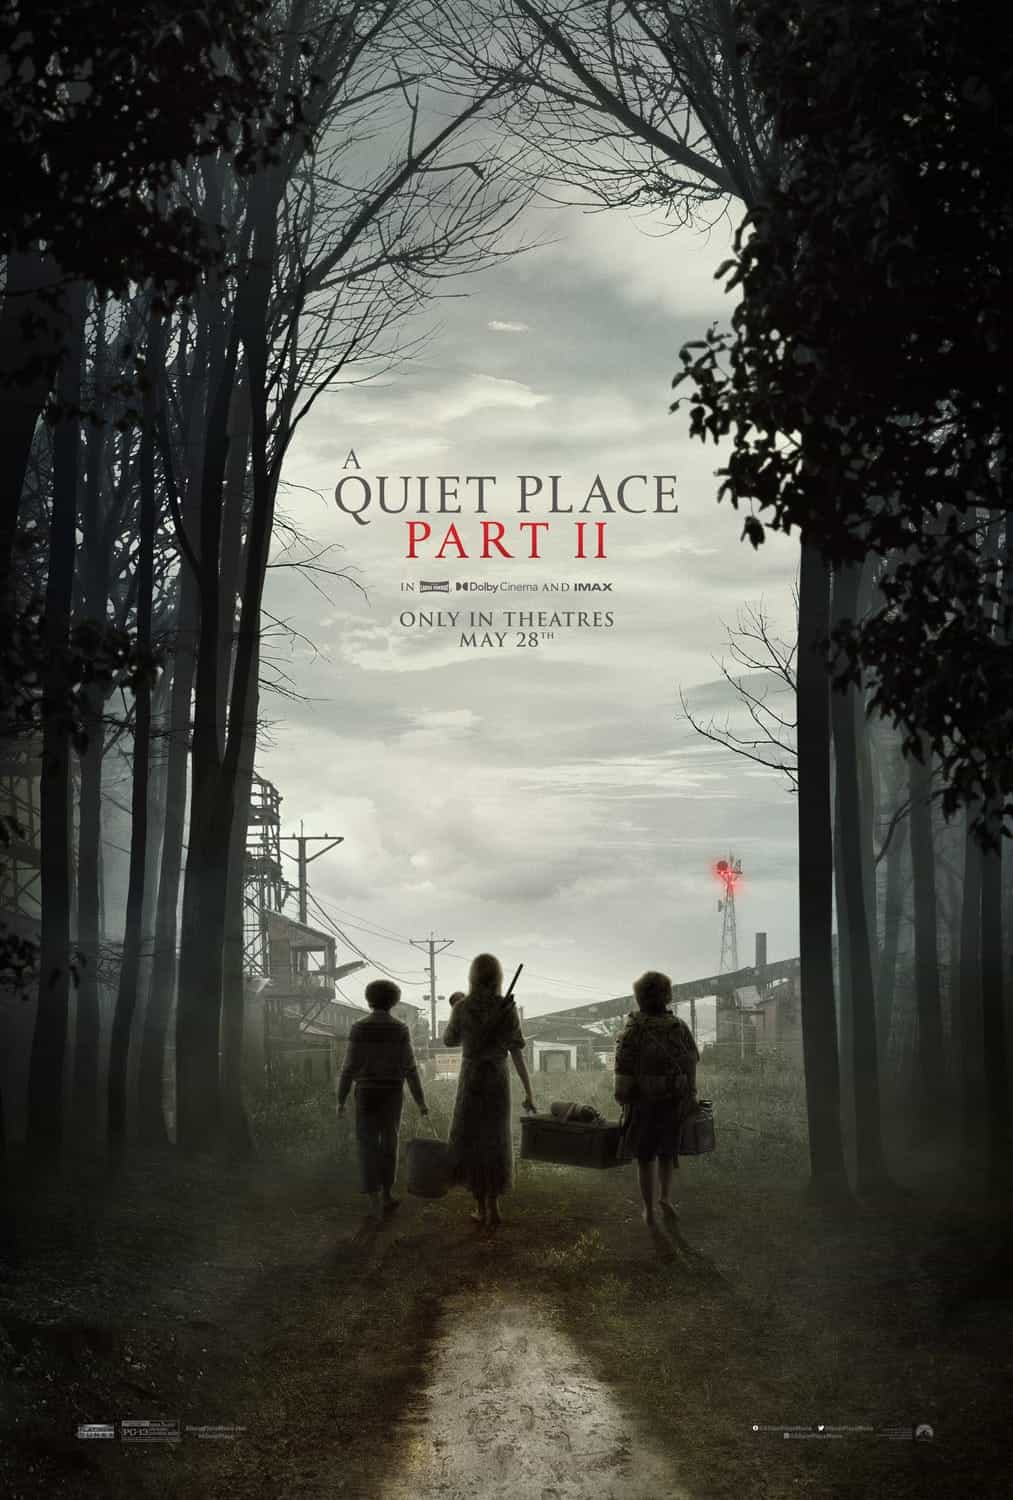 UK Box Office Weekend Report 4th - 6th June 2021:  A Quiet Place 2 makes its UK box office debut at the top with over 3 and half million pound.